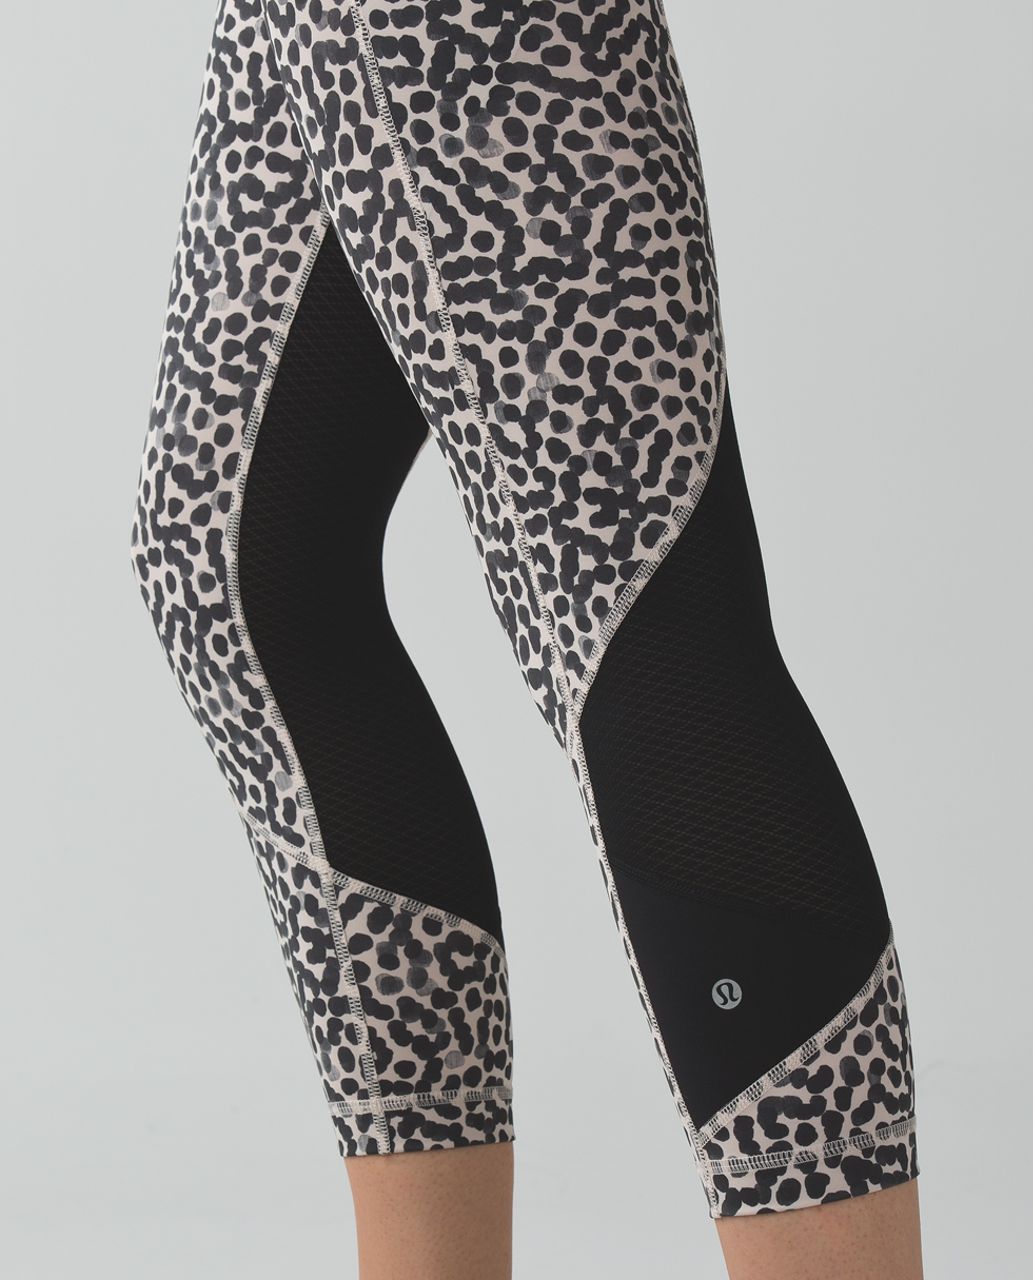 Lululemon Black Pace Rival Crop Leggings - Luxtreme Fabric with